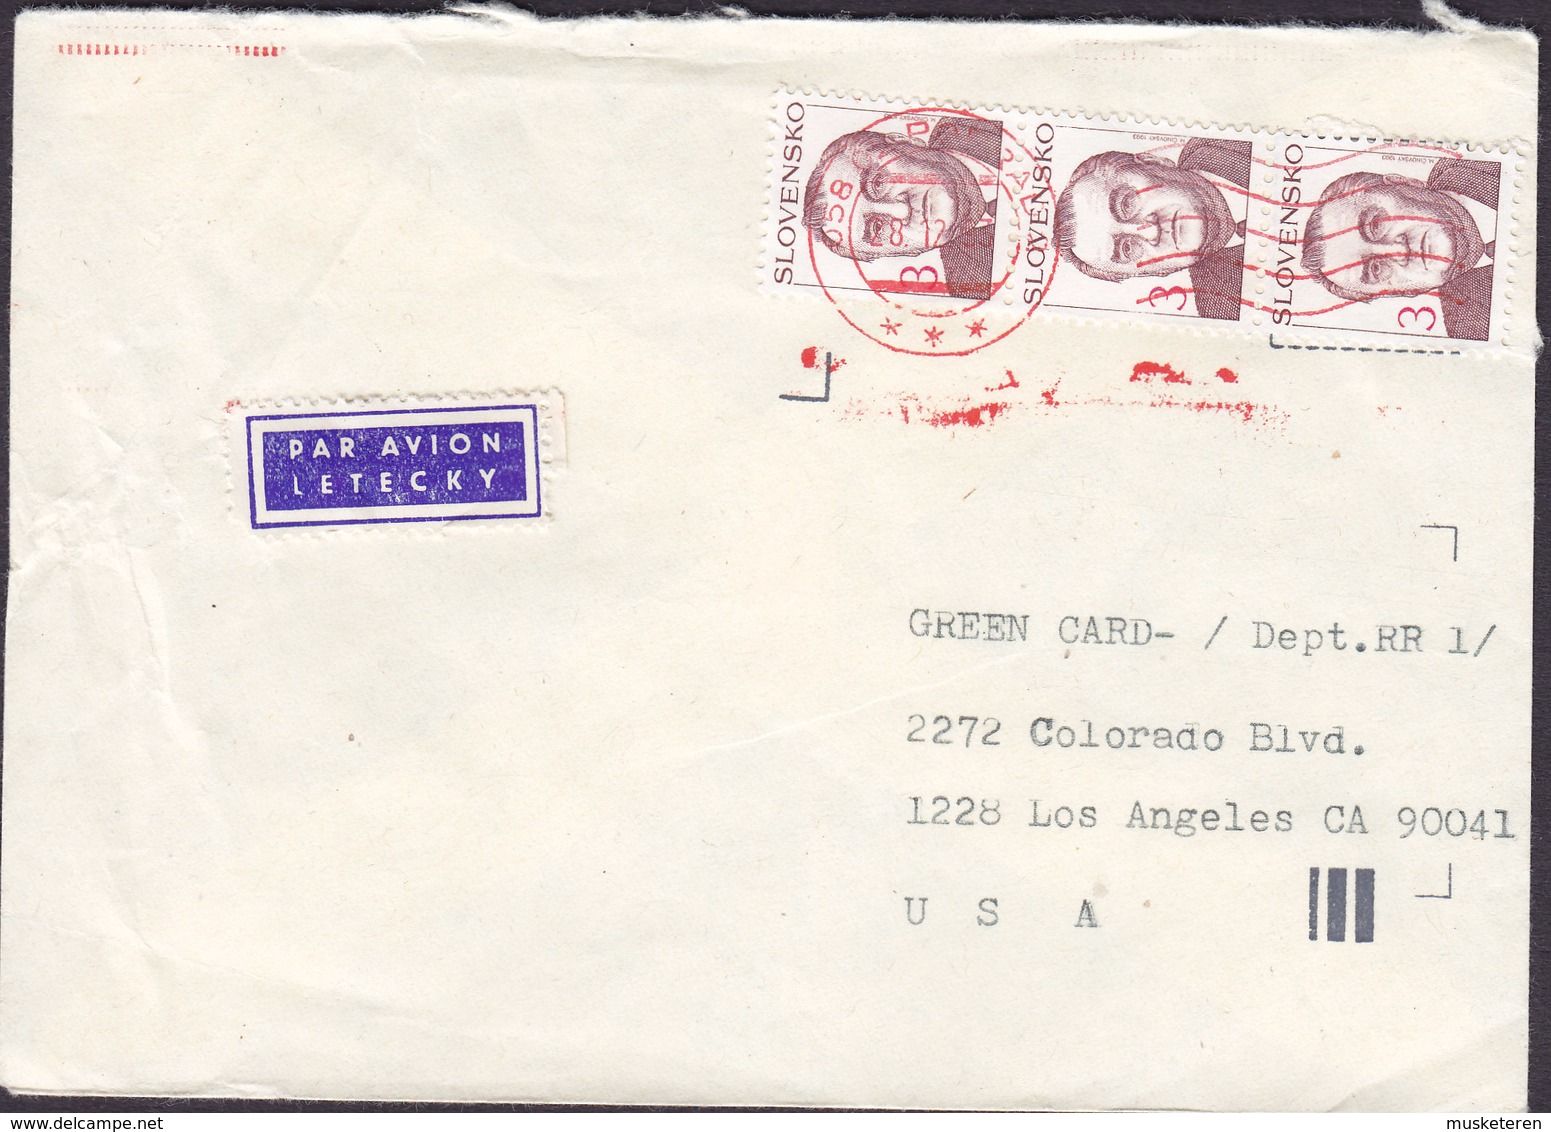 Slovakia PAR AVION Letecky Label 1993 Cover Brief LOS ANGELES United States 3-Stripe - Covers & Documents